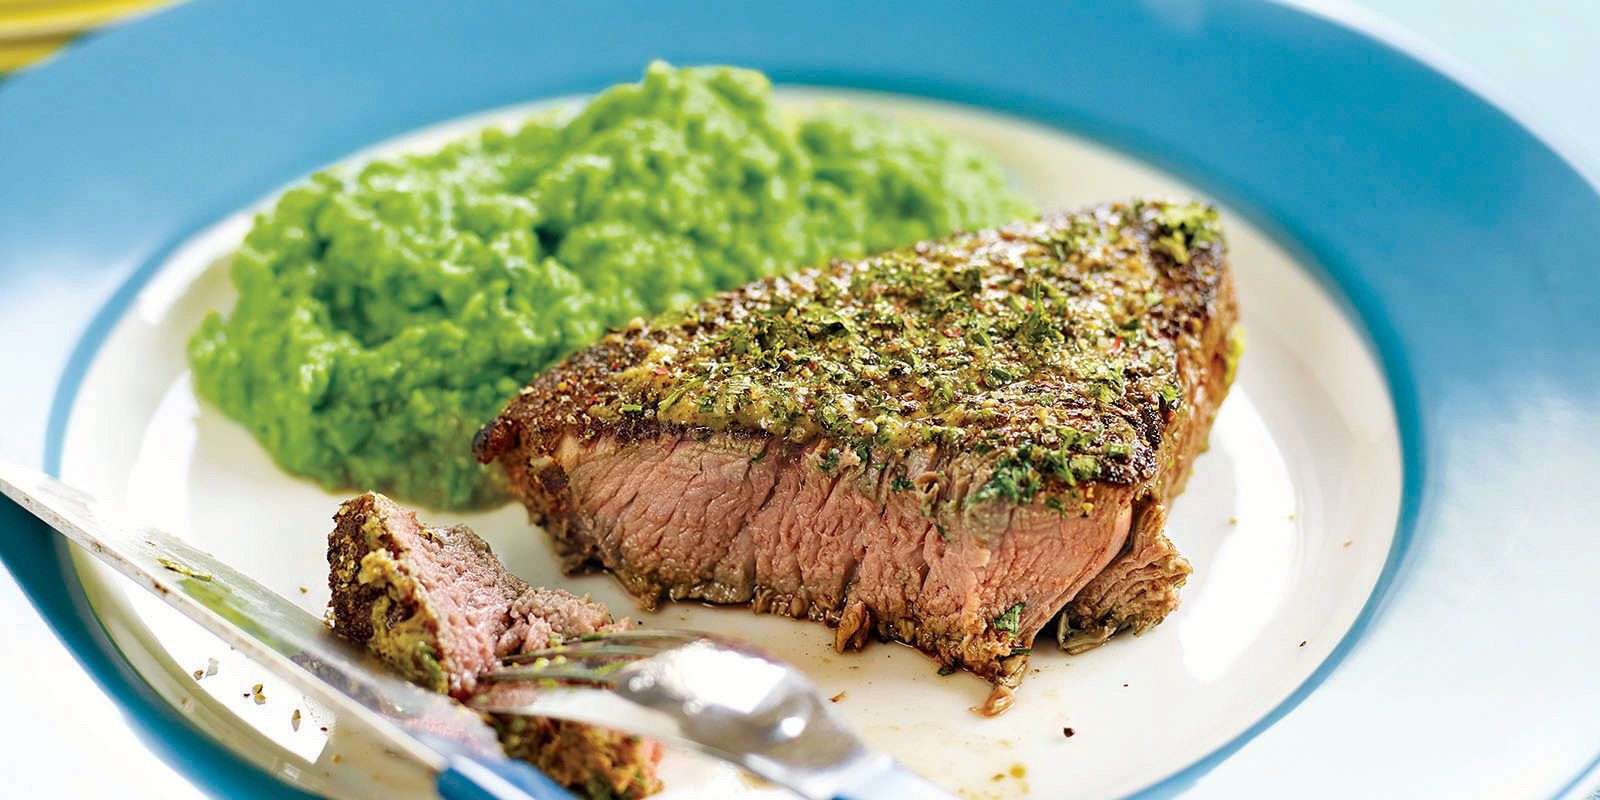 Herb Roasted Steak with Green Pea Mash